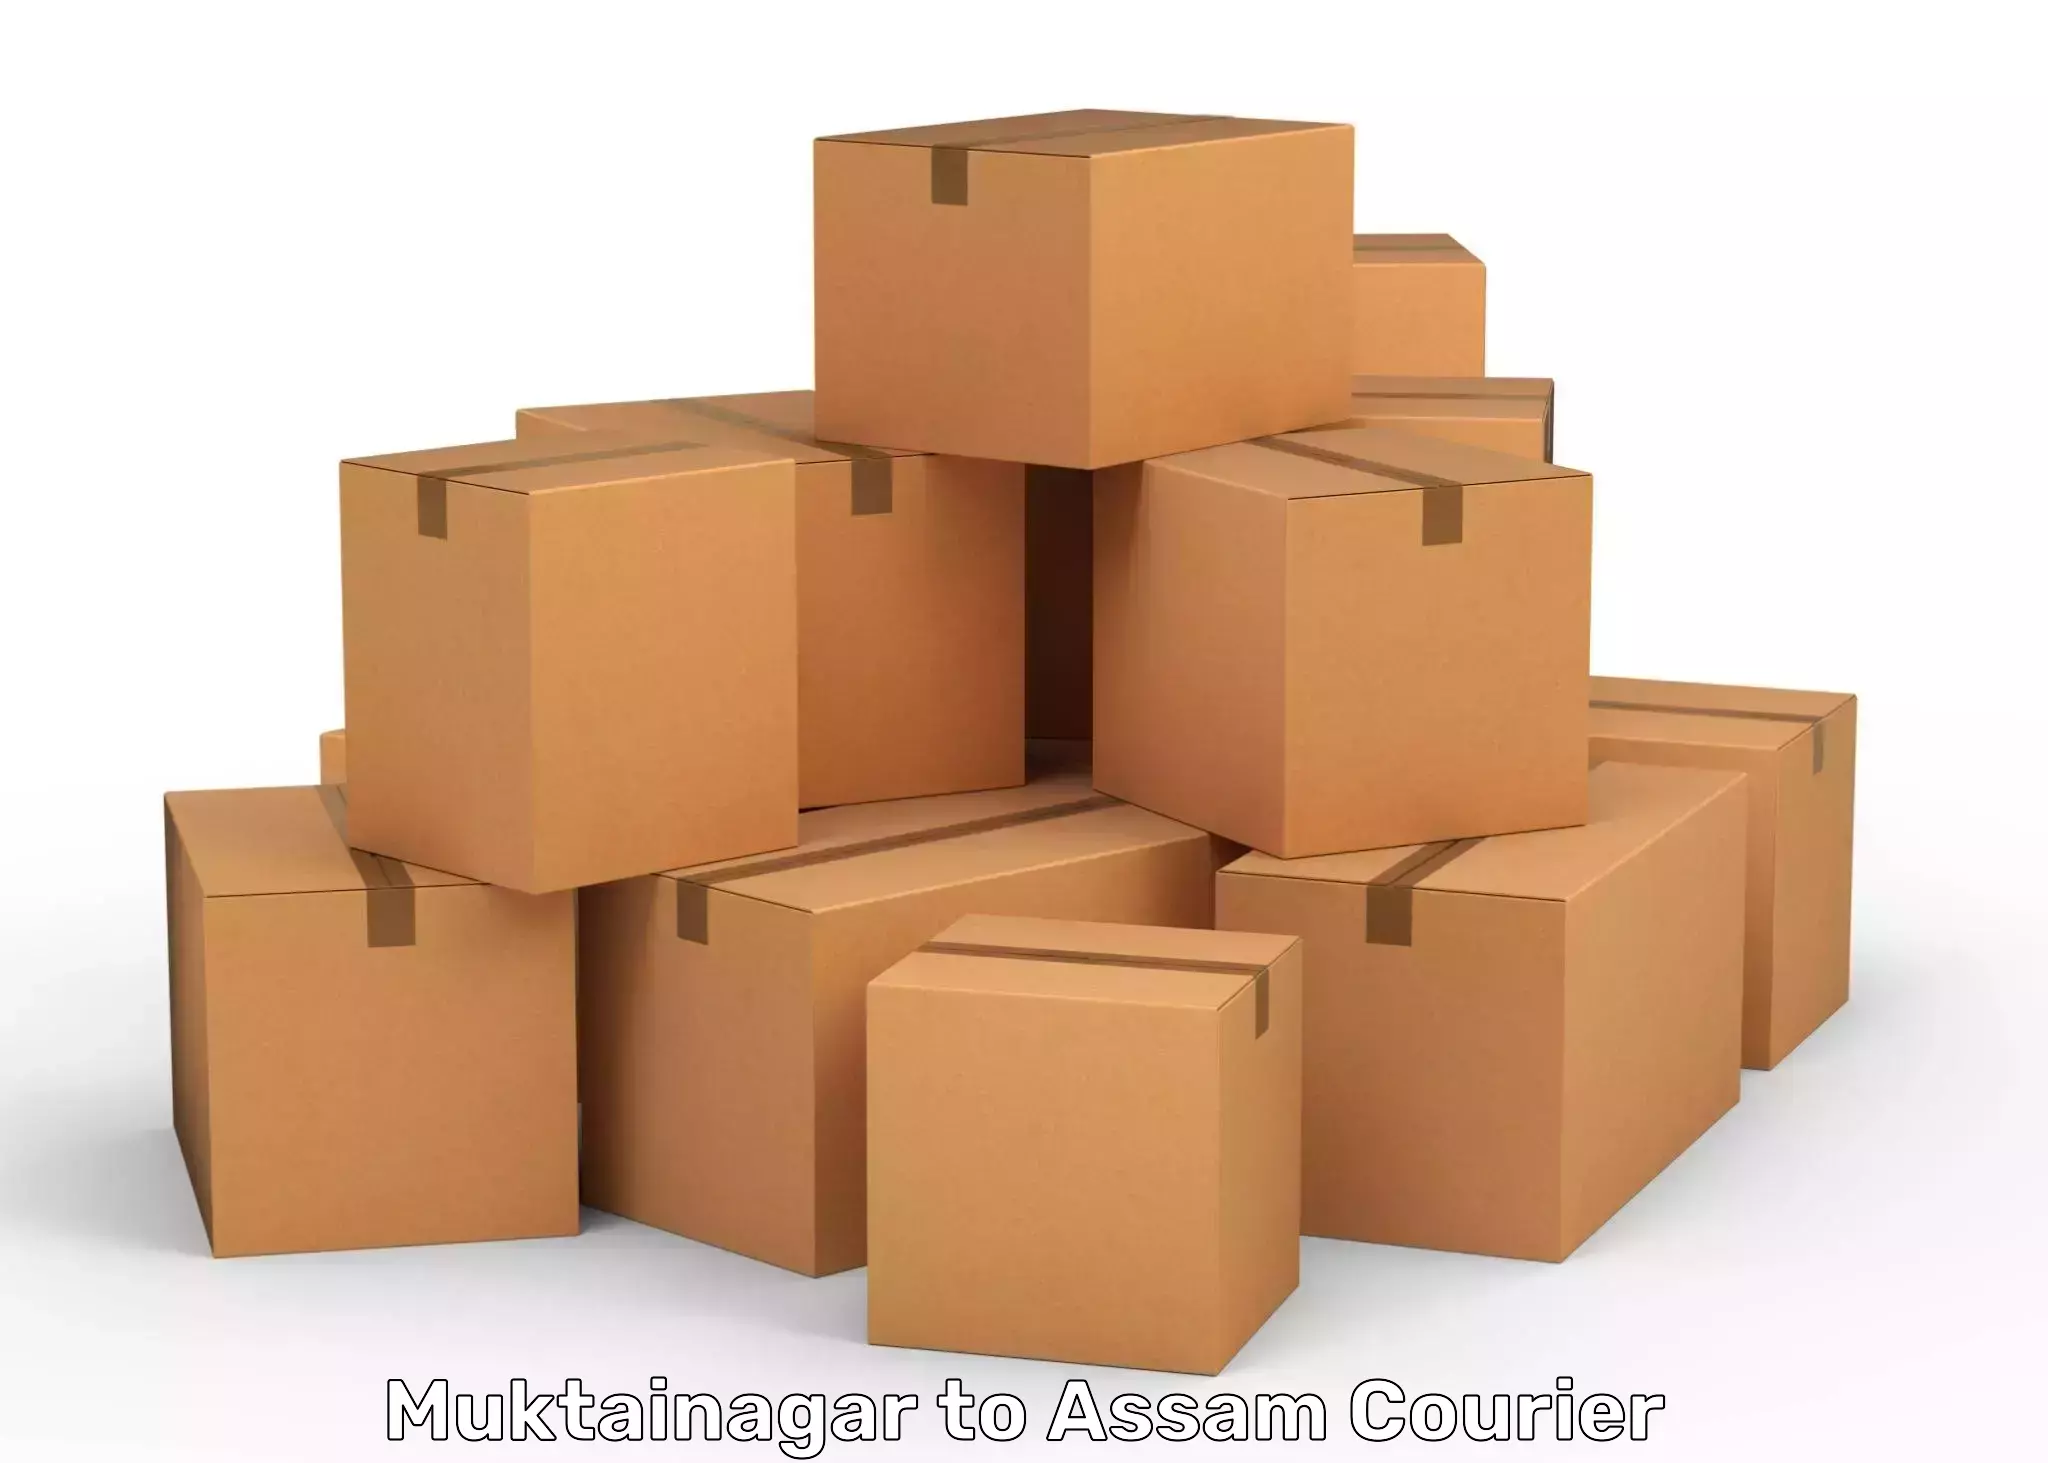 Pharmaceutical courier Muktainagar to Udharbond